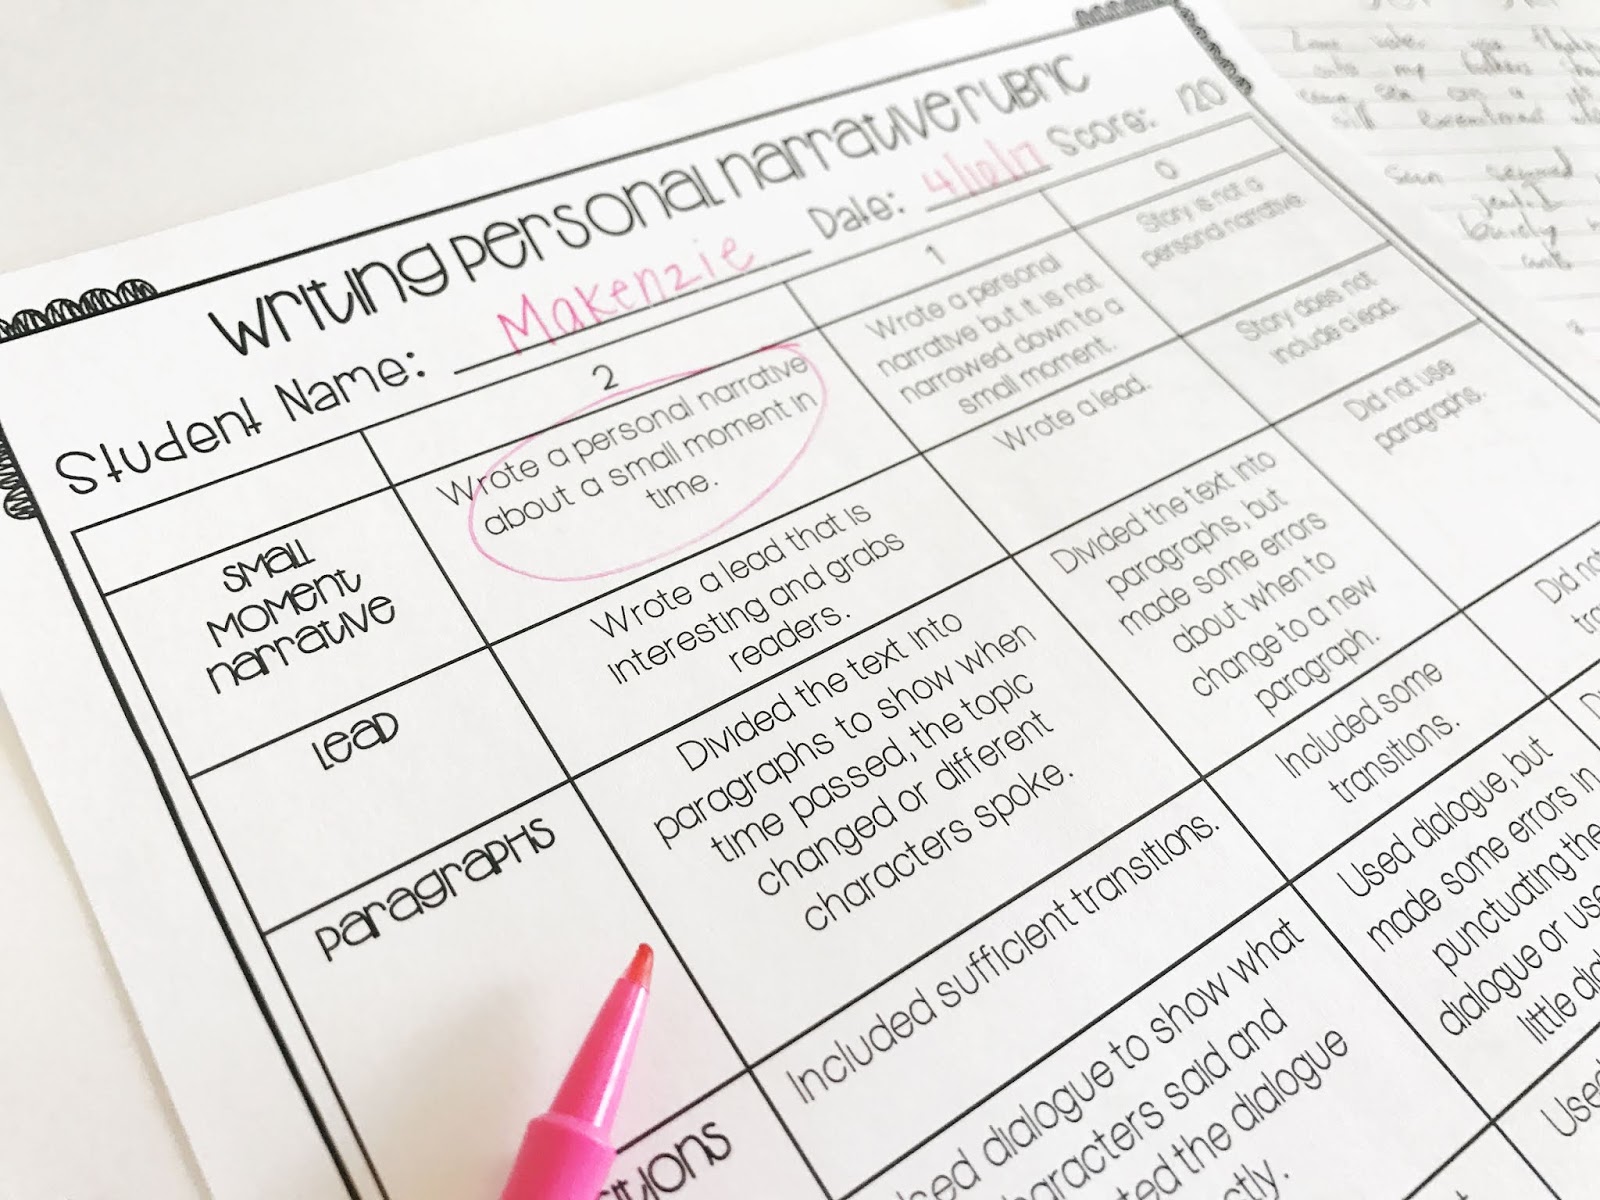 Writing rubric with pink flair pen is great for giving students feedback about their writing
